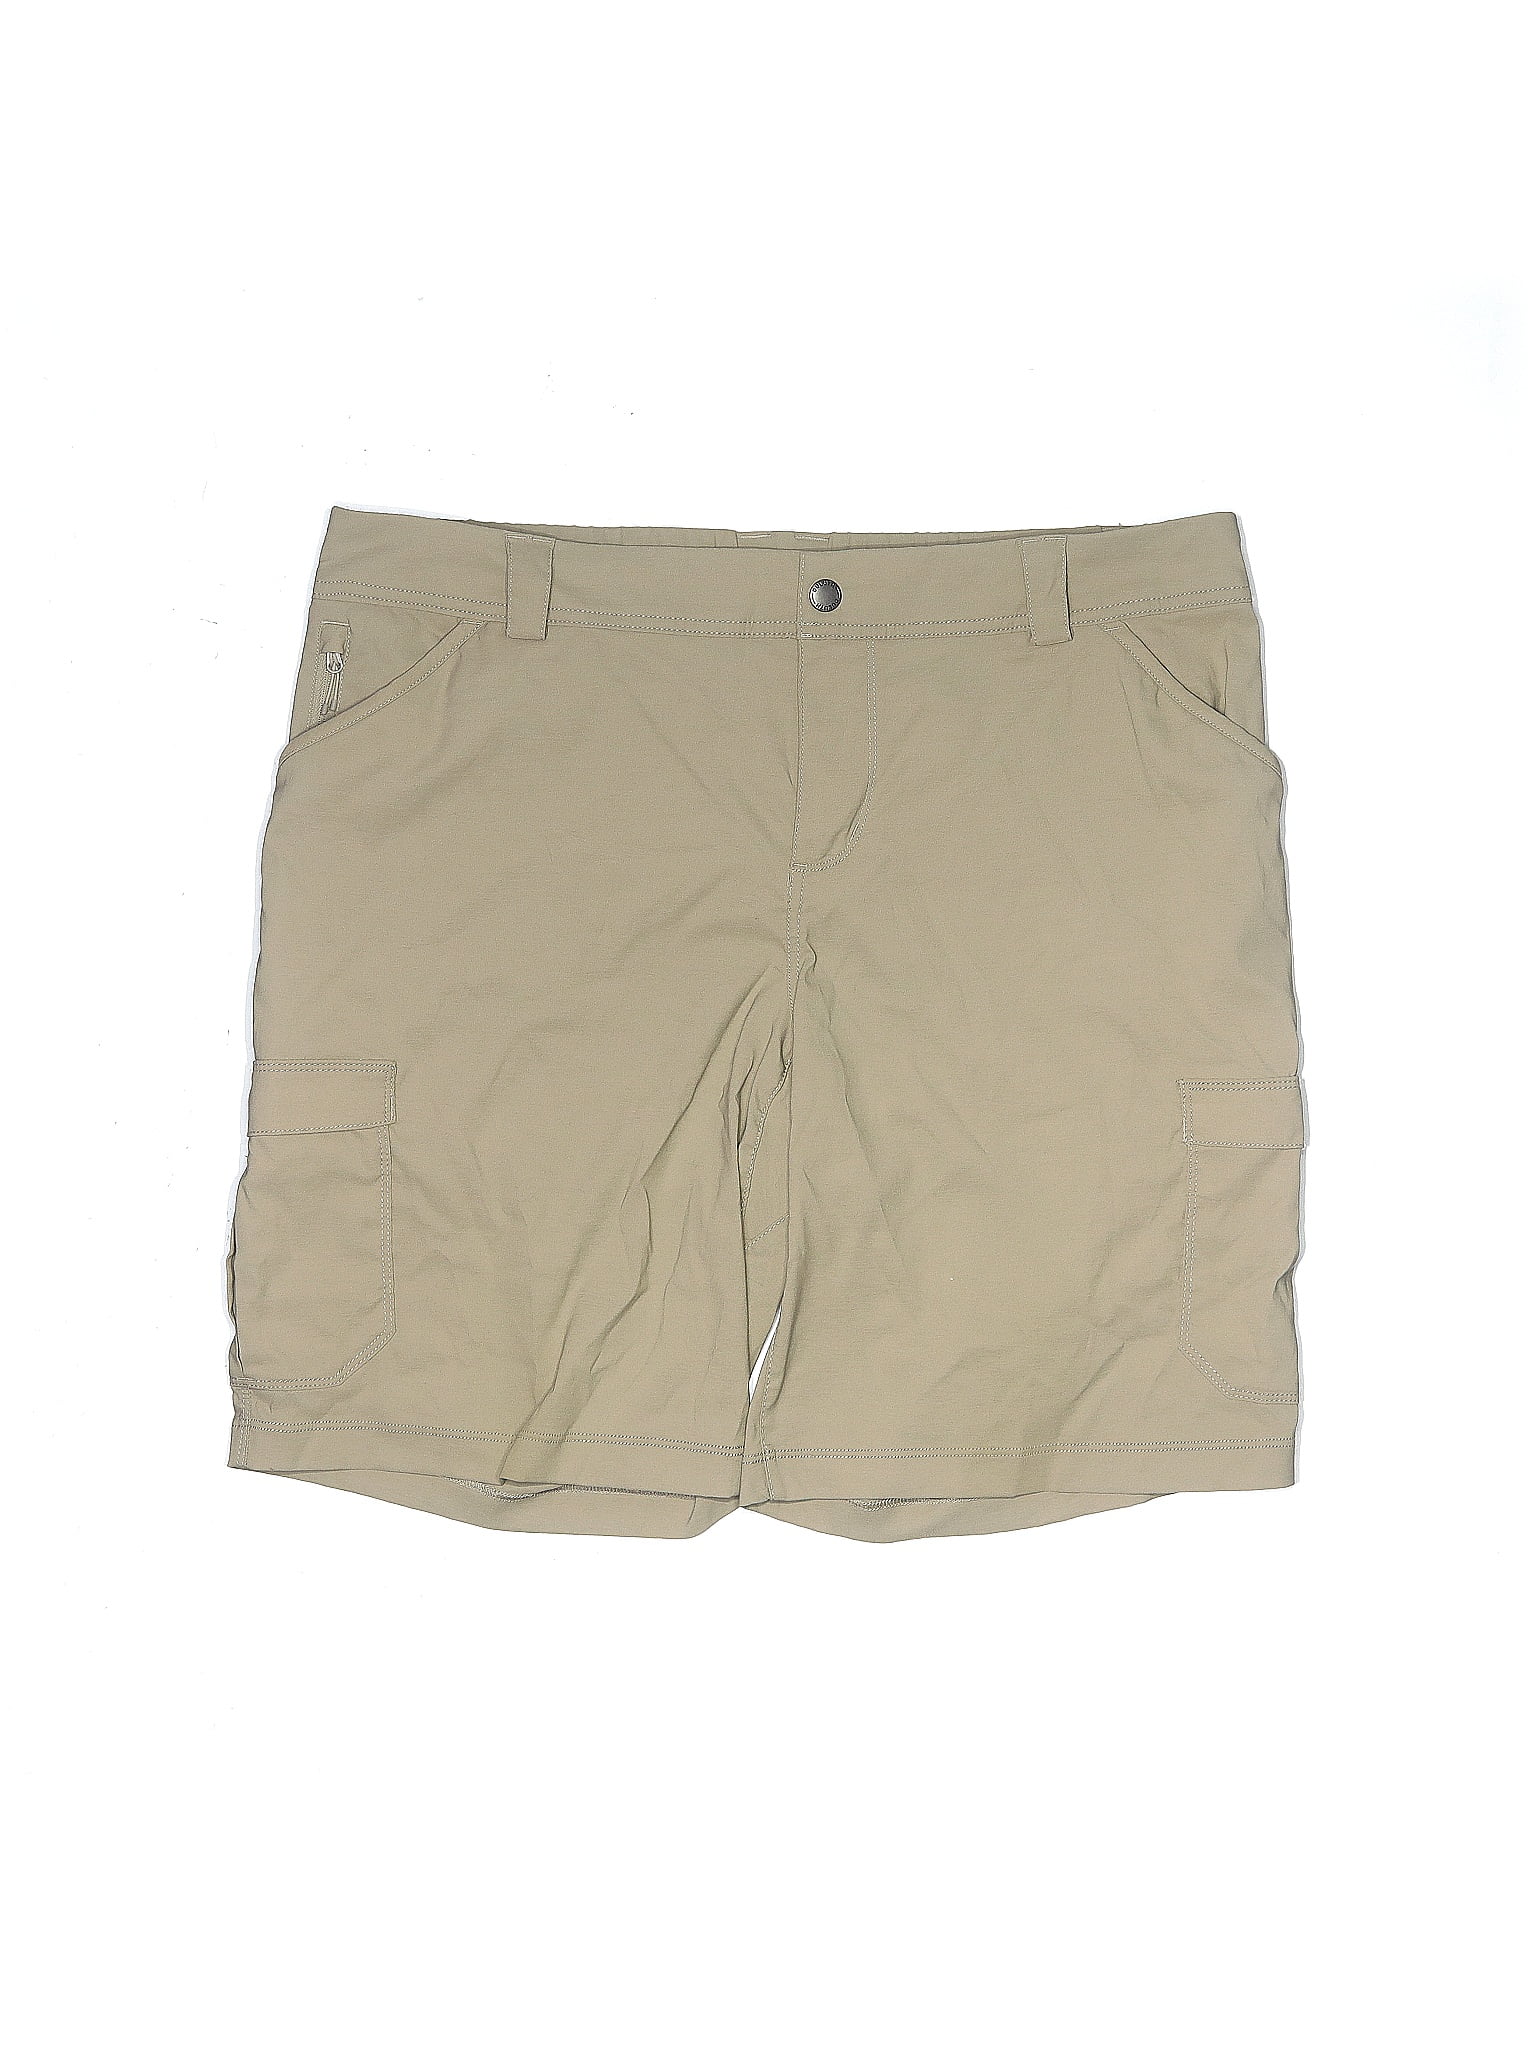 Duluth Trading Co. Tan Shorts Size 16 - 36% off | ThredUp